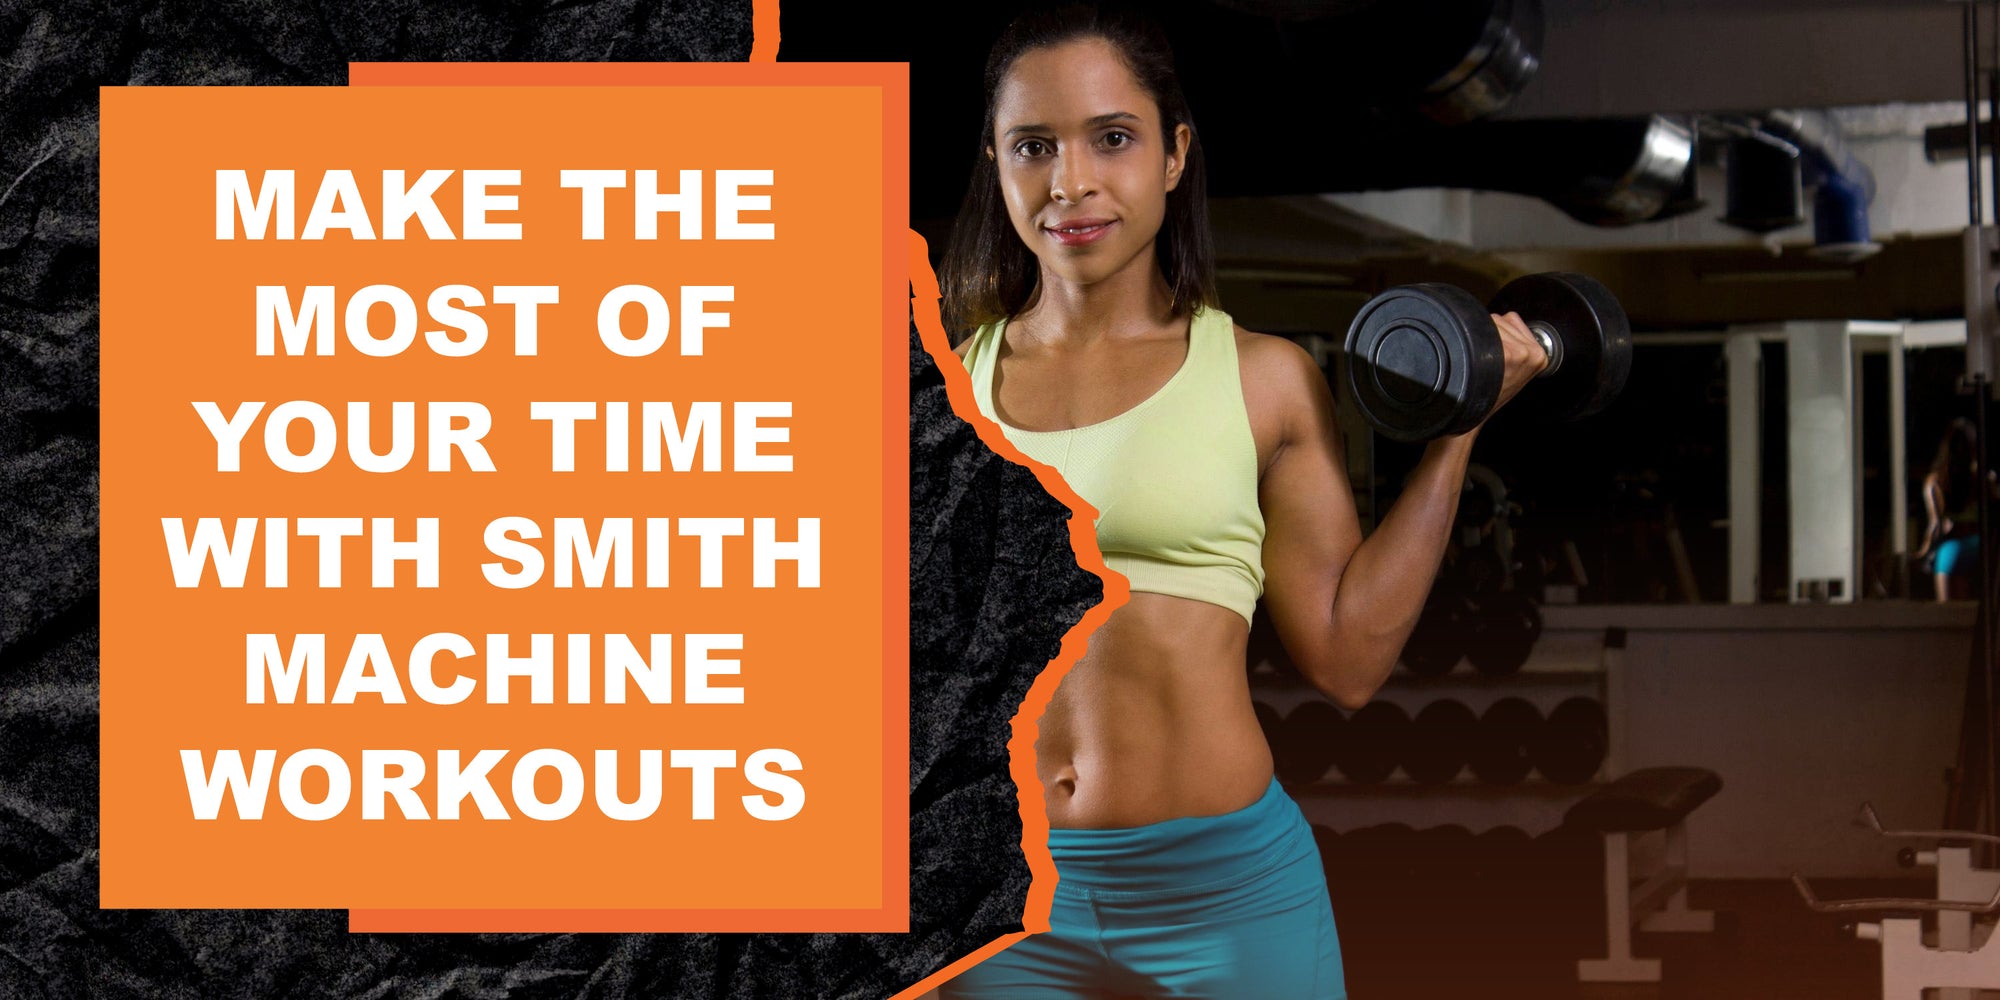 Make the Most of Your Time with Smith Machine Workouts